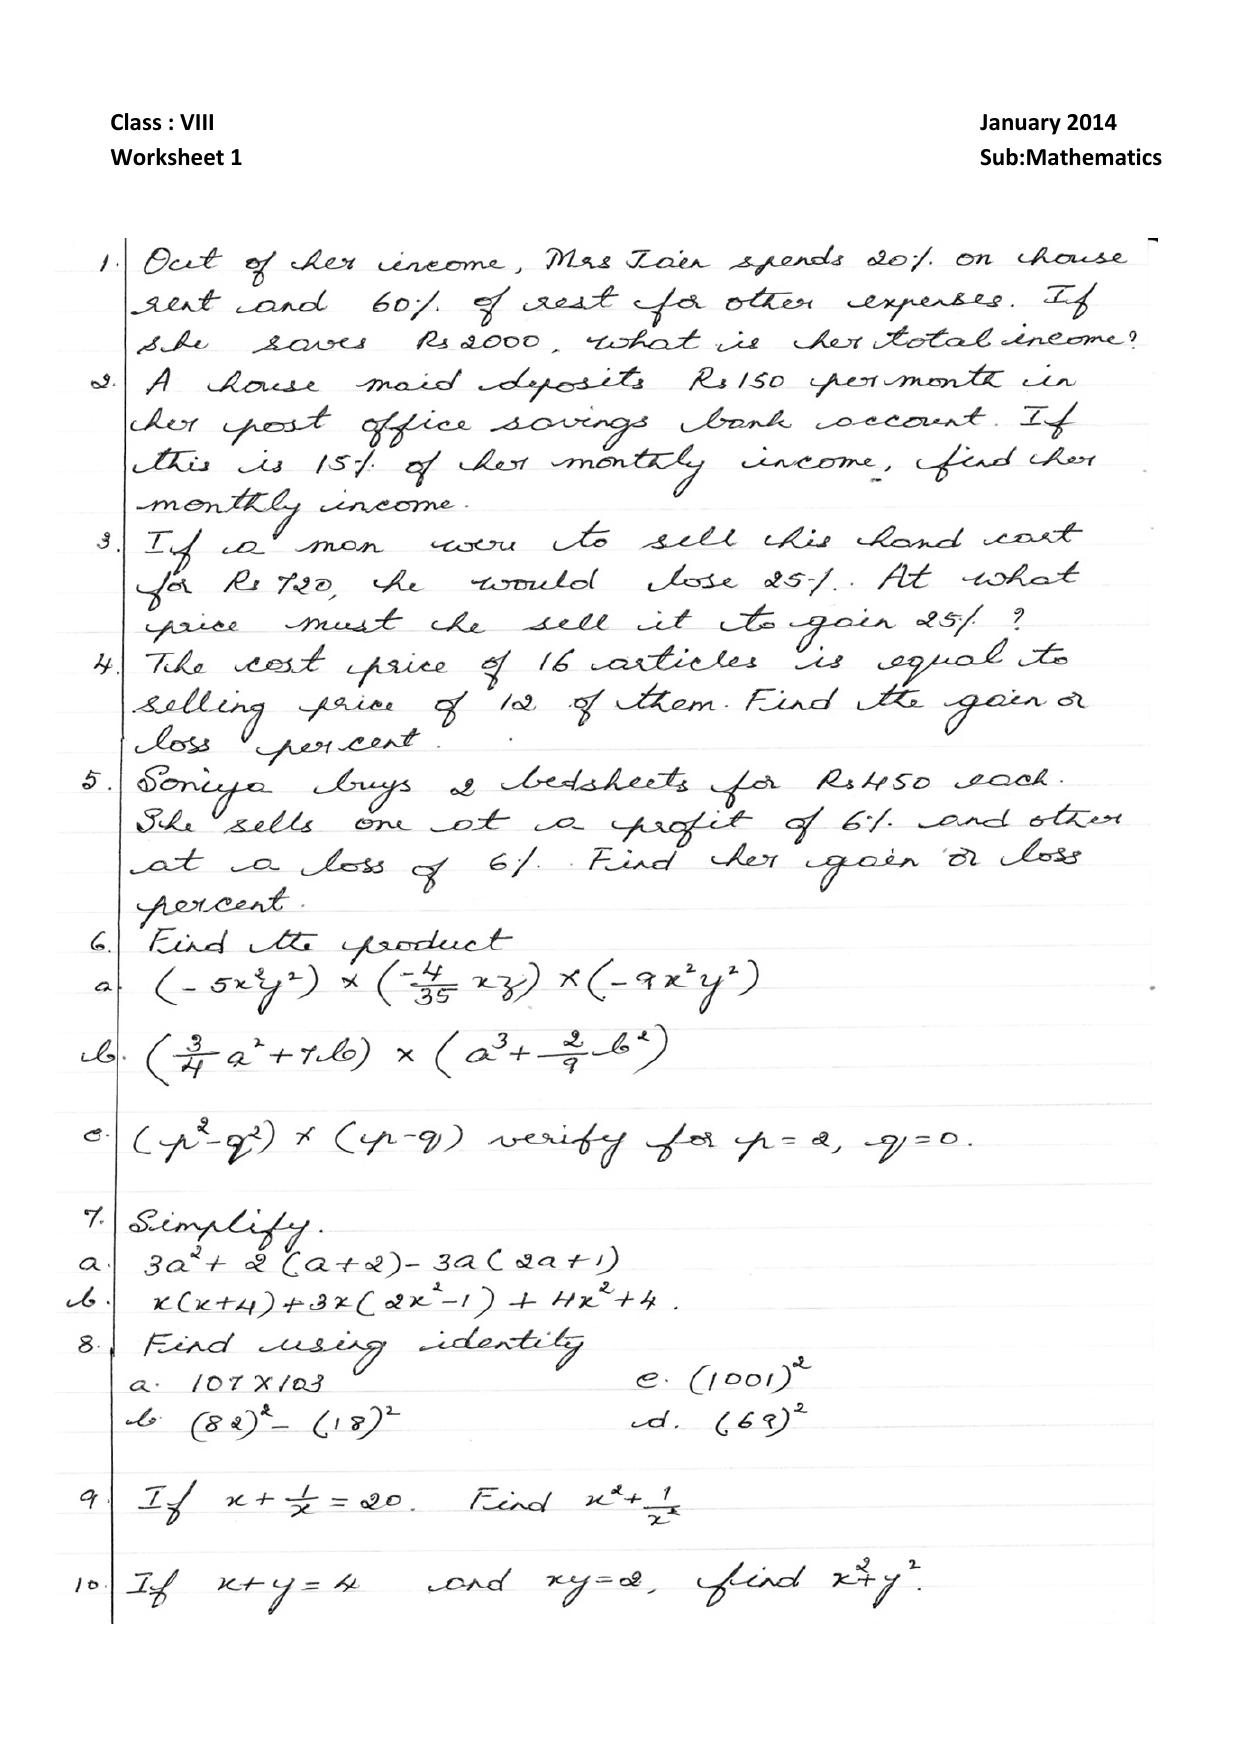 CBSE Worksheets for Class 8 Mathematics Assignment 4 - Page 1